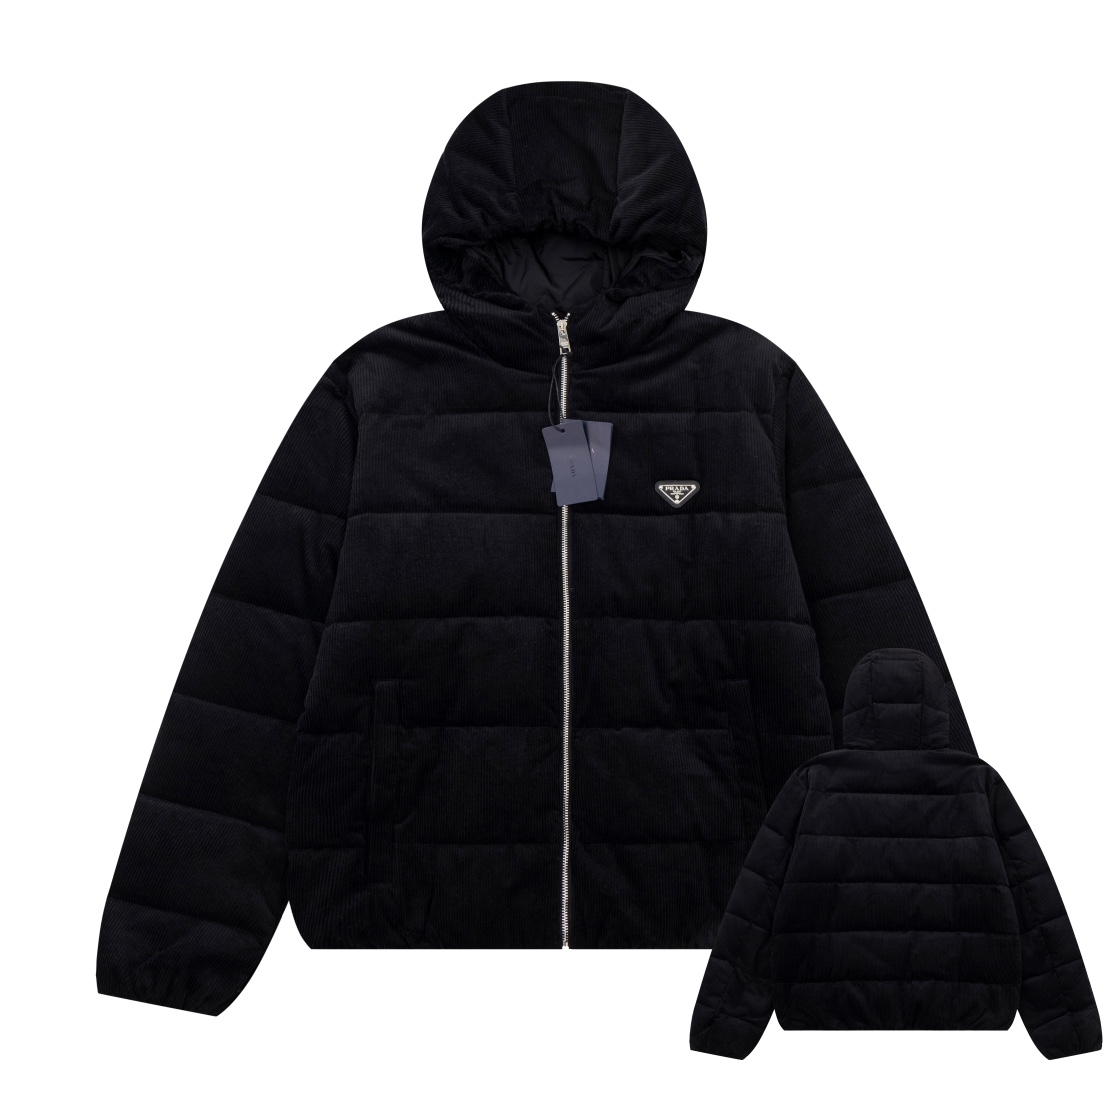 Prada Clothing Down Jacket Unisex Corduroy Fall/Winter Collection Hooded Top